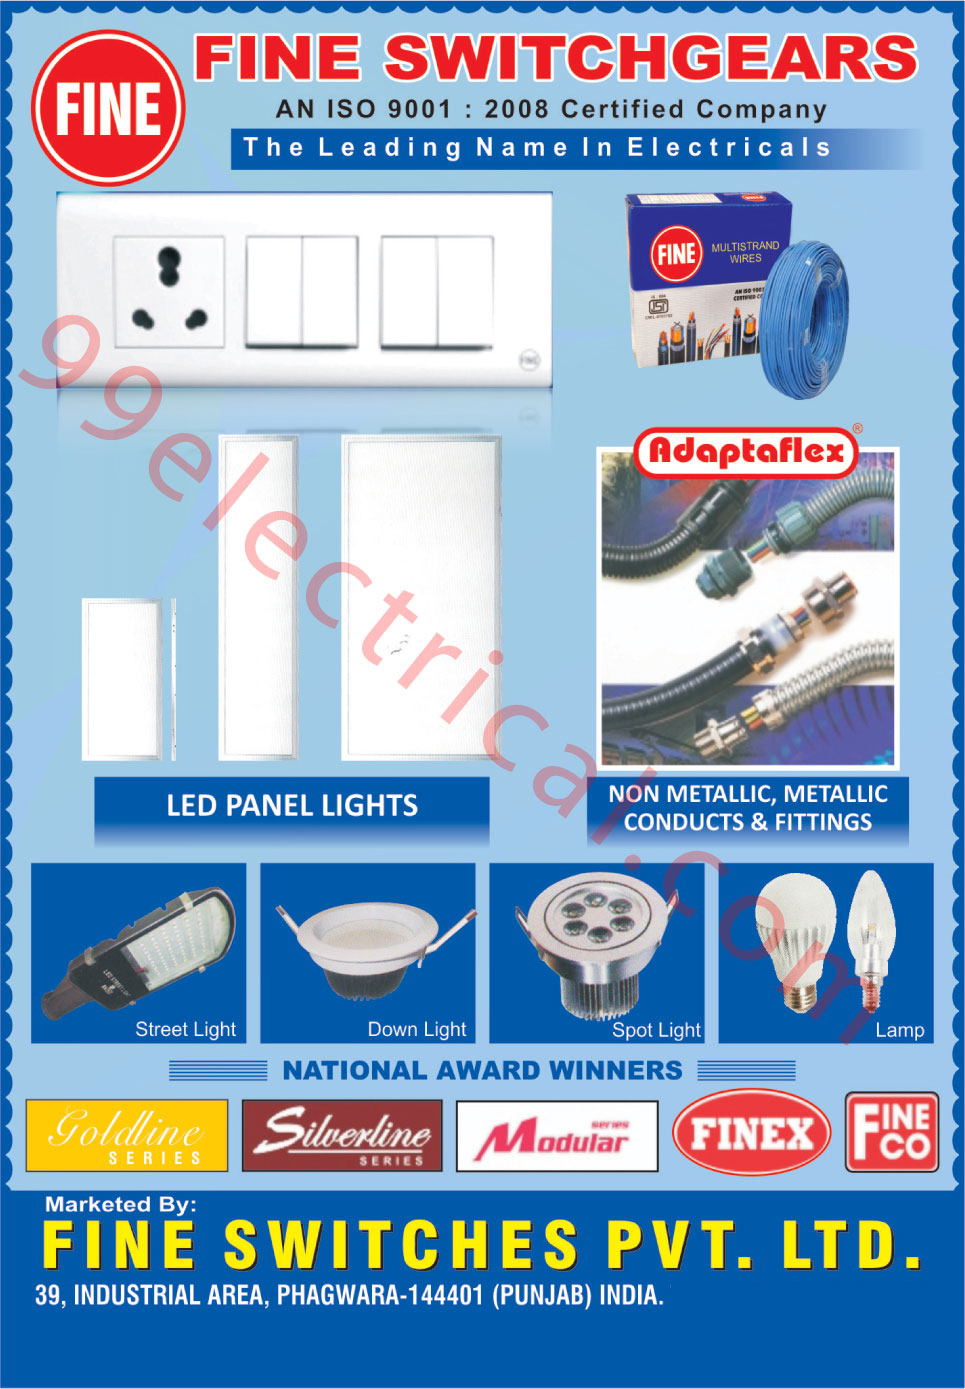 Led Lights, Led Panel Lights, Led Down Lights, Led Street Lights, Led Spot Lights, Led Lamps, Modular Switches, Electric Cables, Electric Accessories, Dp Switches, MCBs, Isolators, Traditional Bells, Wires, Cables, General Accessories, Led Panel Lights, Remote Control Switches, Wireless Door Bells, Conducts Fittings, Metallic Conduits Fittings, Non Metallic Conduits Fittings, Switchgears, Street Lights, Led Tubes, Down Lights, Lamps, Led Bulbs